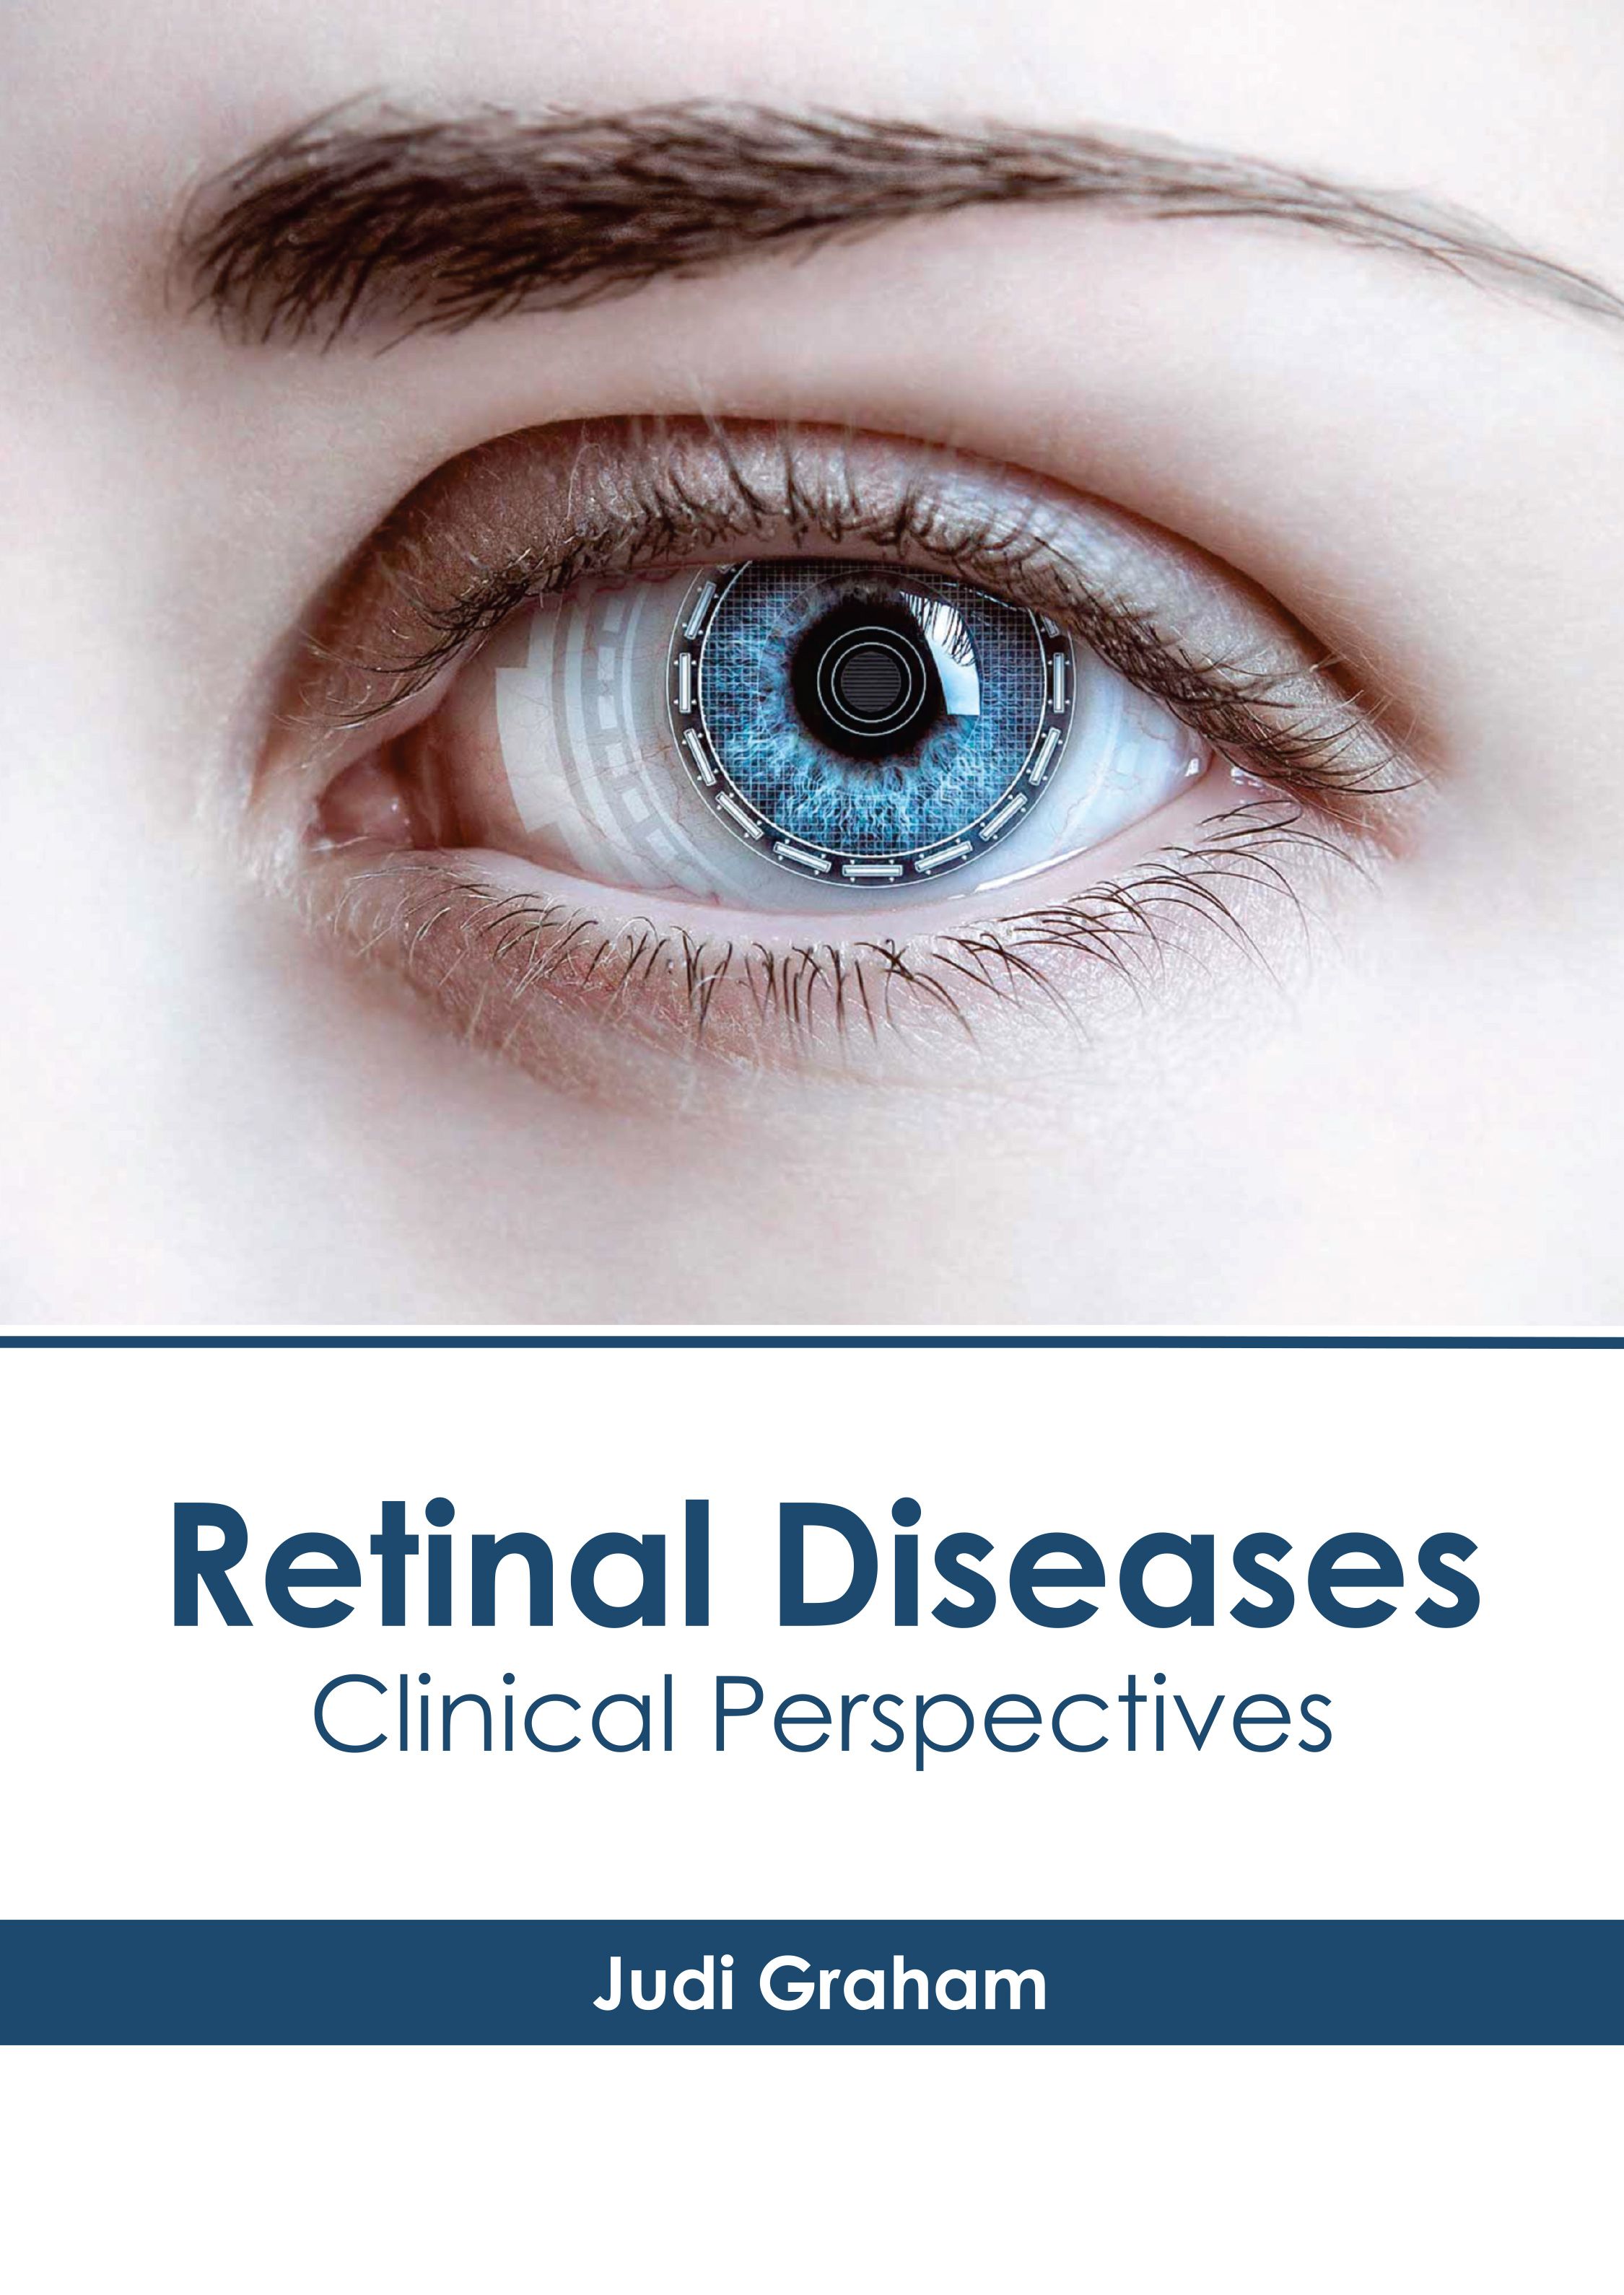 RETINAL DISEASES: CLINICAL PERSPECTIVES